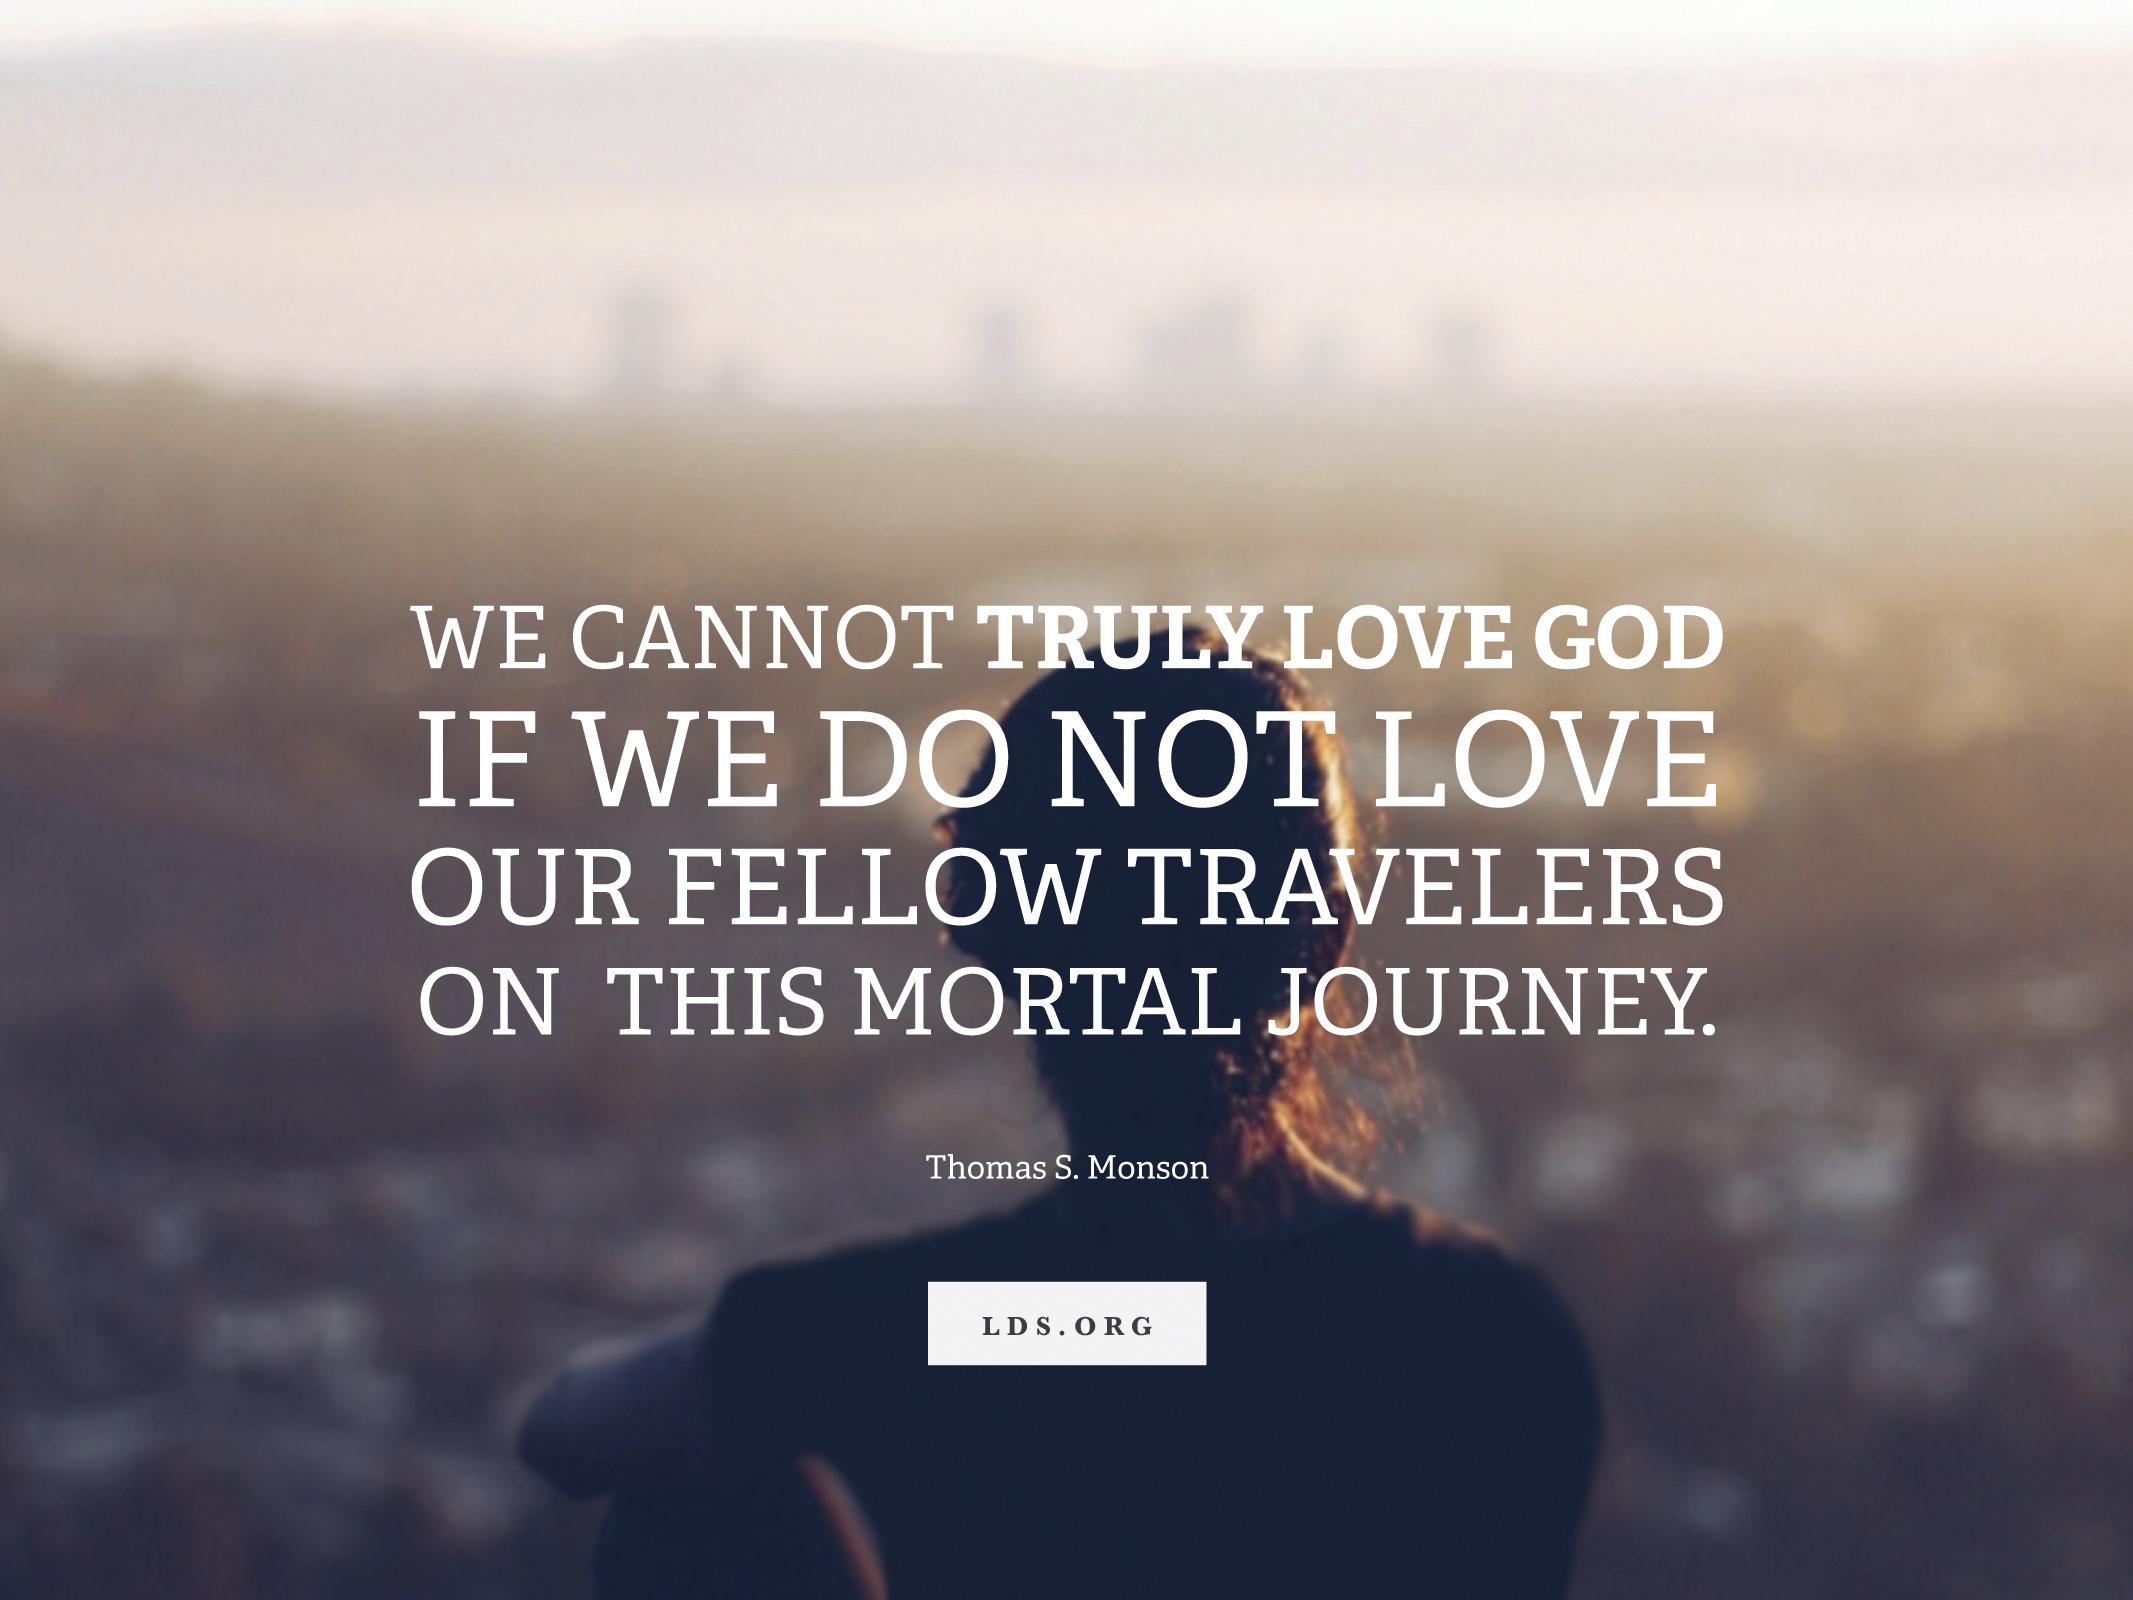 “We cannot truly love God if we do not love our fellow travelers on this mortal journey.” —President Thomas S. Monson, “Love—the Essence of the Gospel”